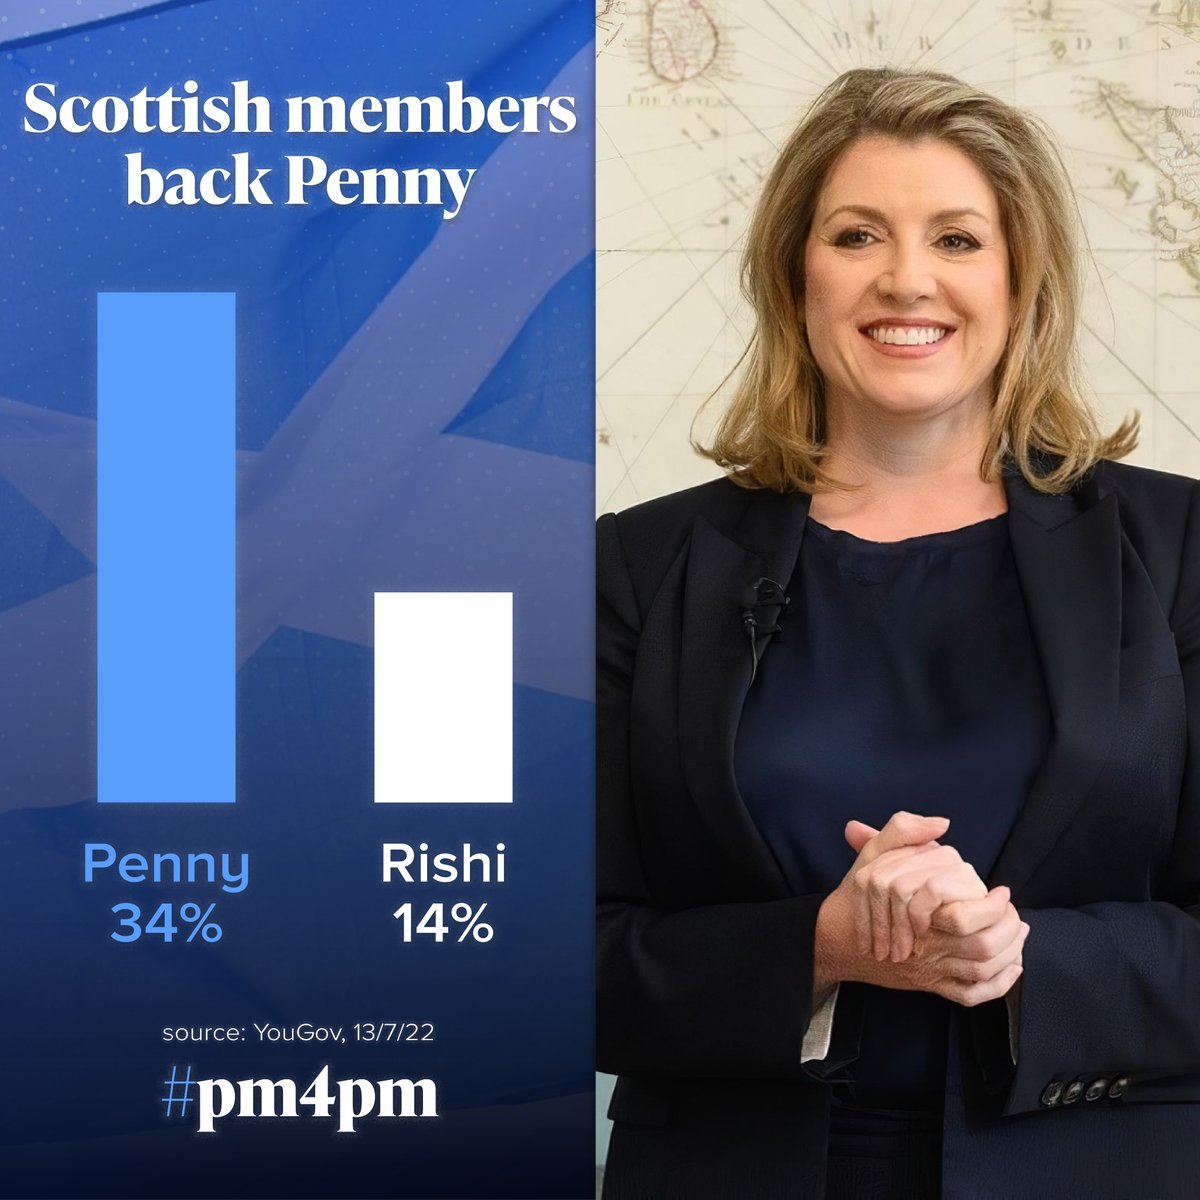 We need to take the fight to Scotland to restore trust and defeat the SNP. Scottish members overwhelmingly back Penny to deliver for us. #PM4PM